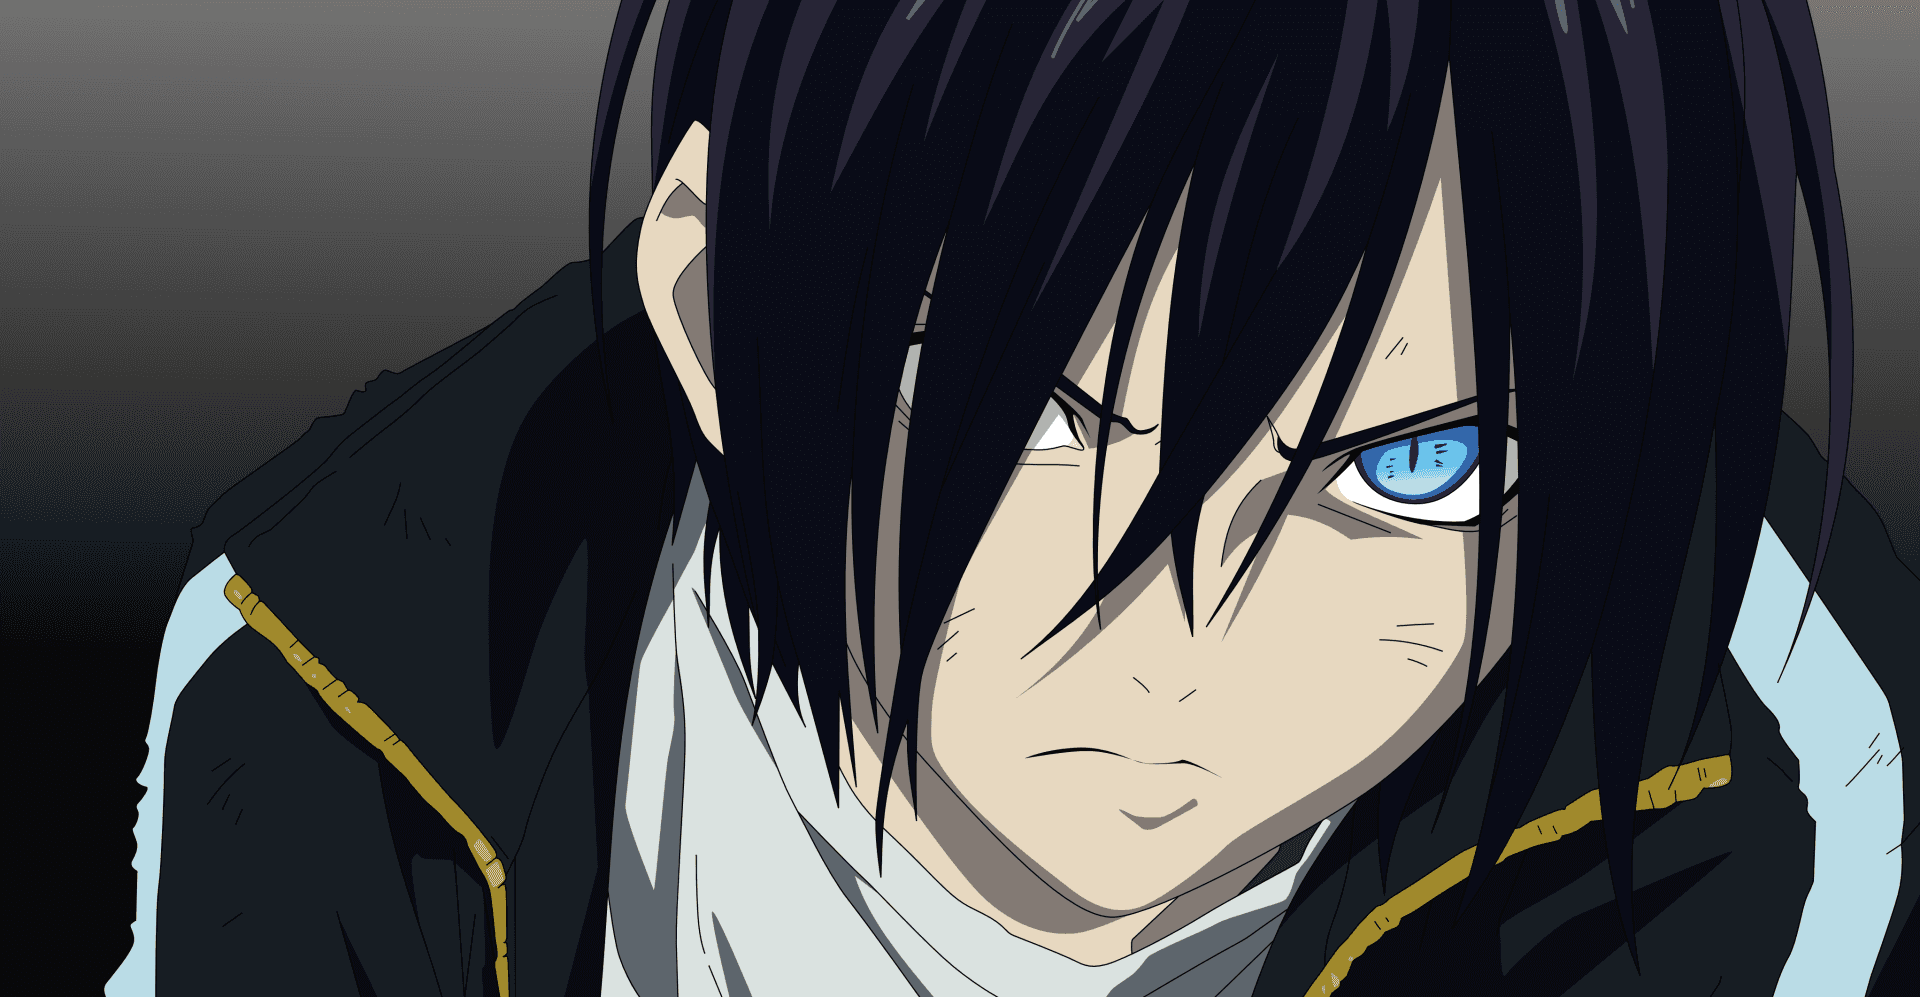 "God of Fortune - Noragami"